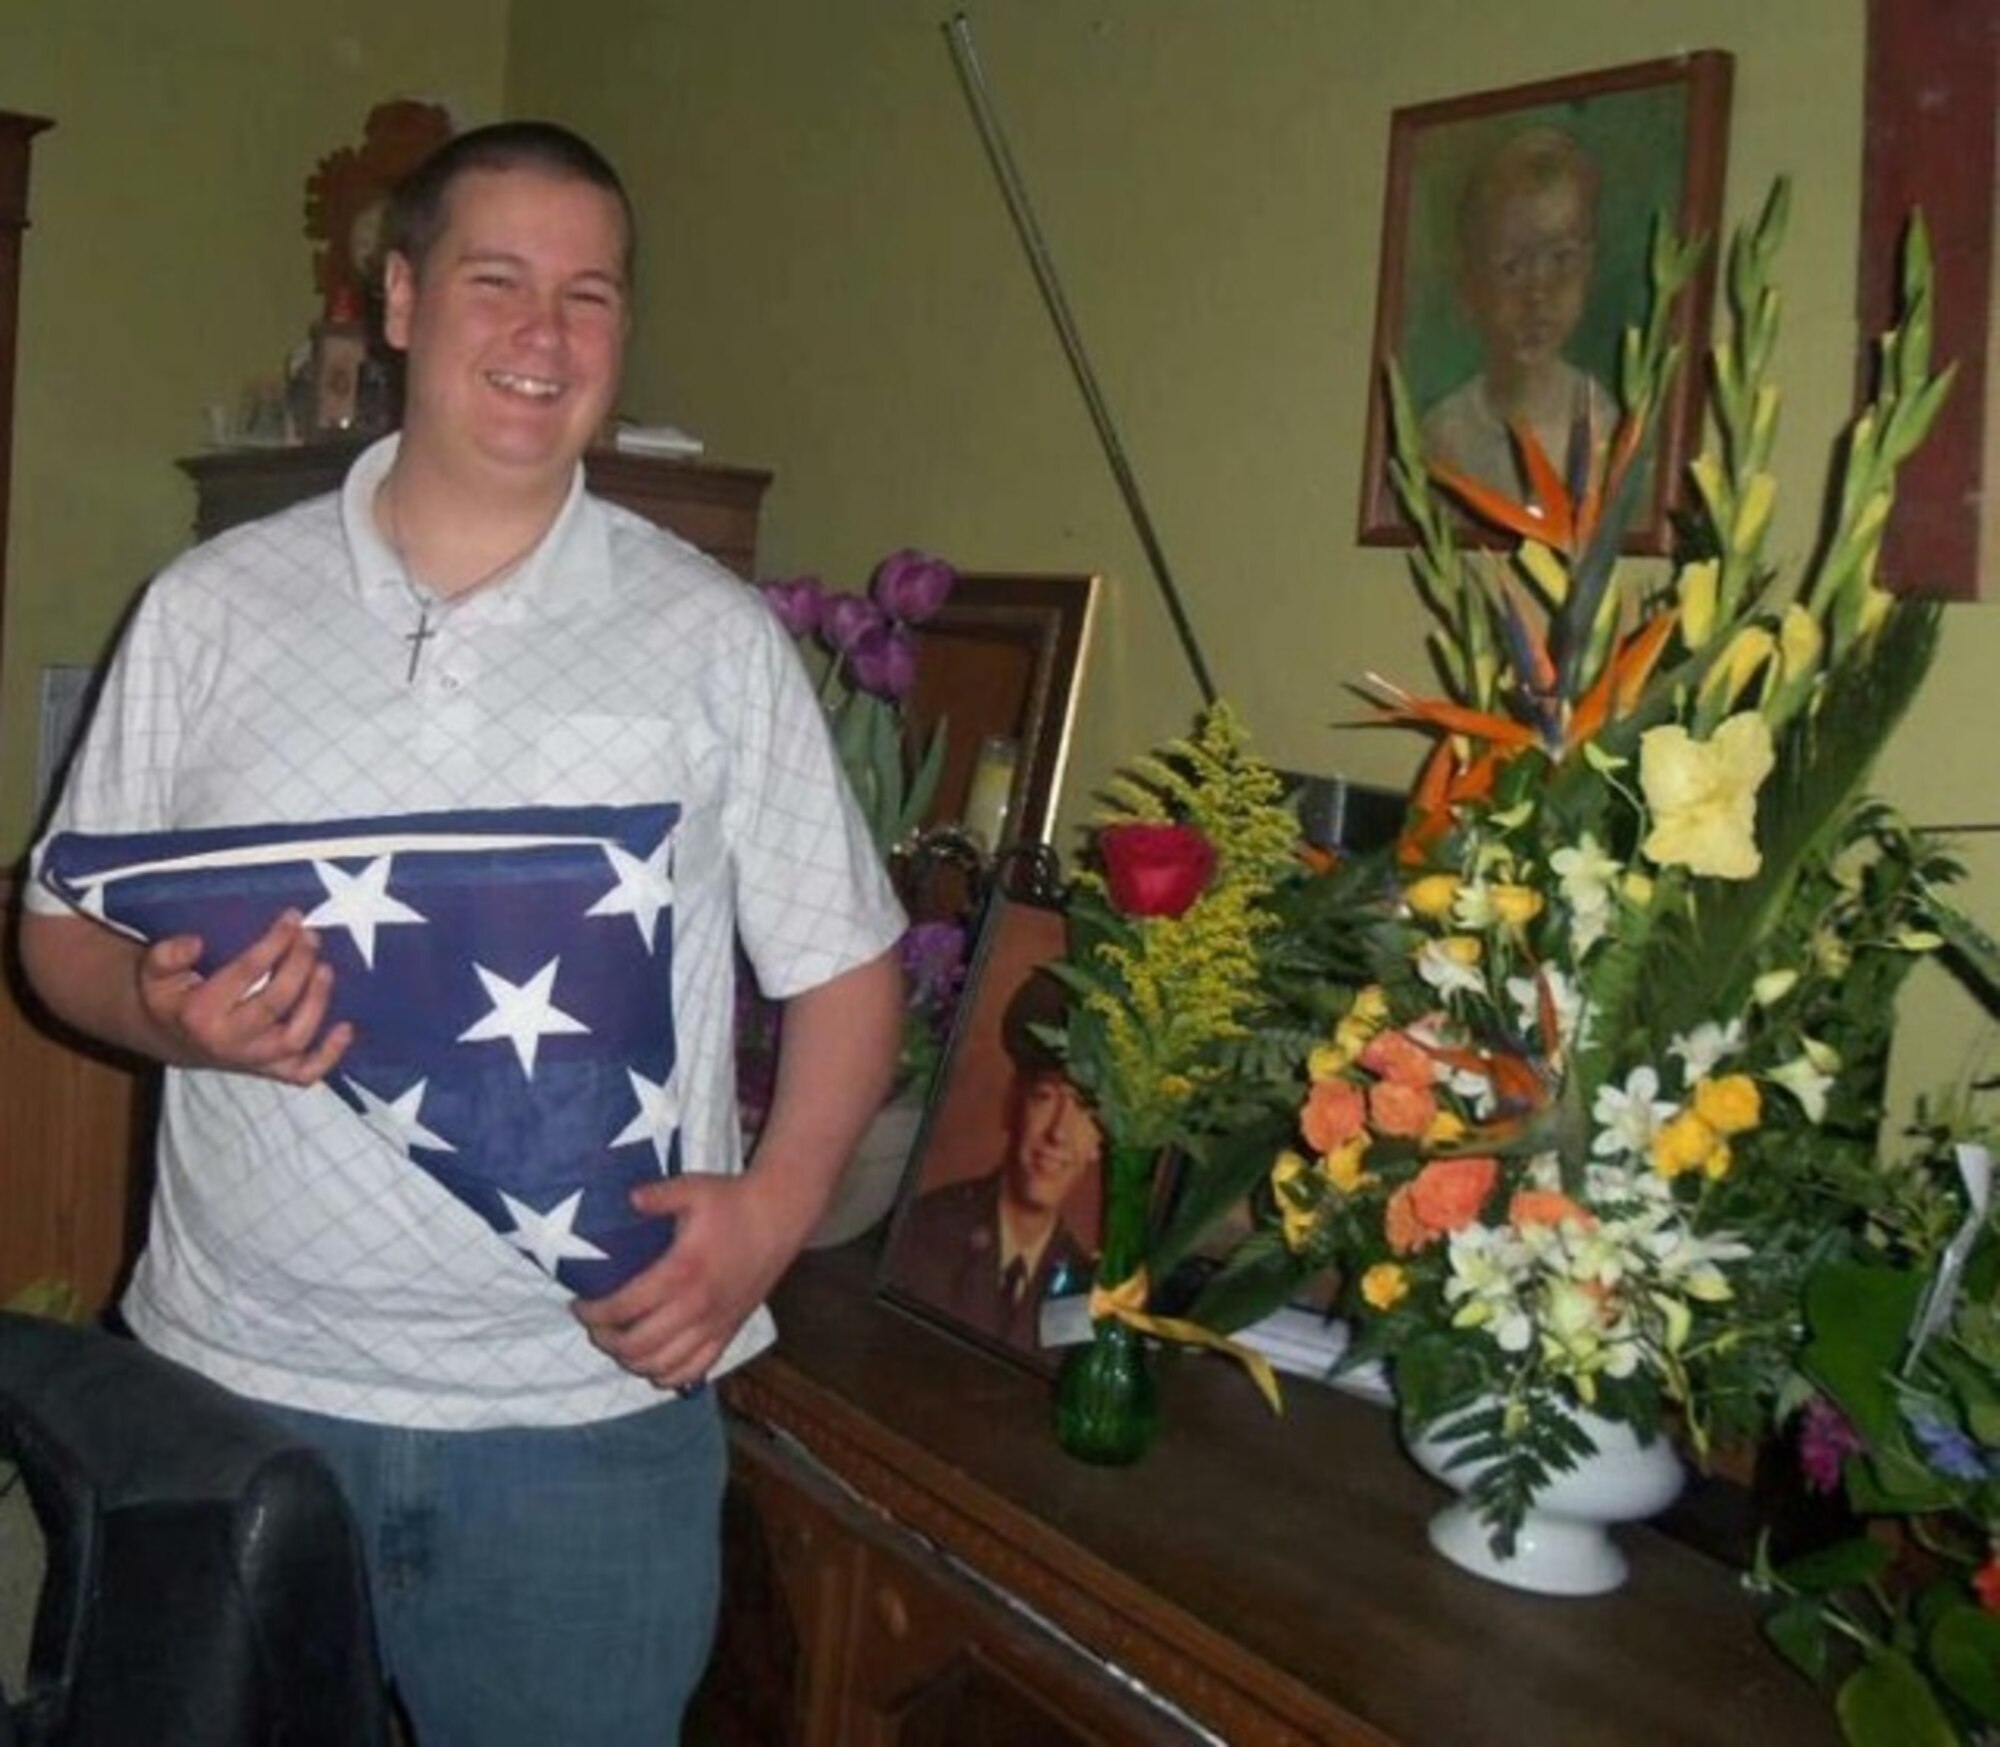 U.S. Air Force Airman 1st Class Daniel Meyer, 55th Aircraft Maintenance Squadron, holds an American flag and stands next to a picture of his father when he was in the Air Force. Meyer, lost more than 100 pounds in order to become an Airman and follow in his father’s shoes. (Courtesy photo)